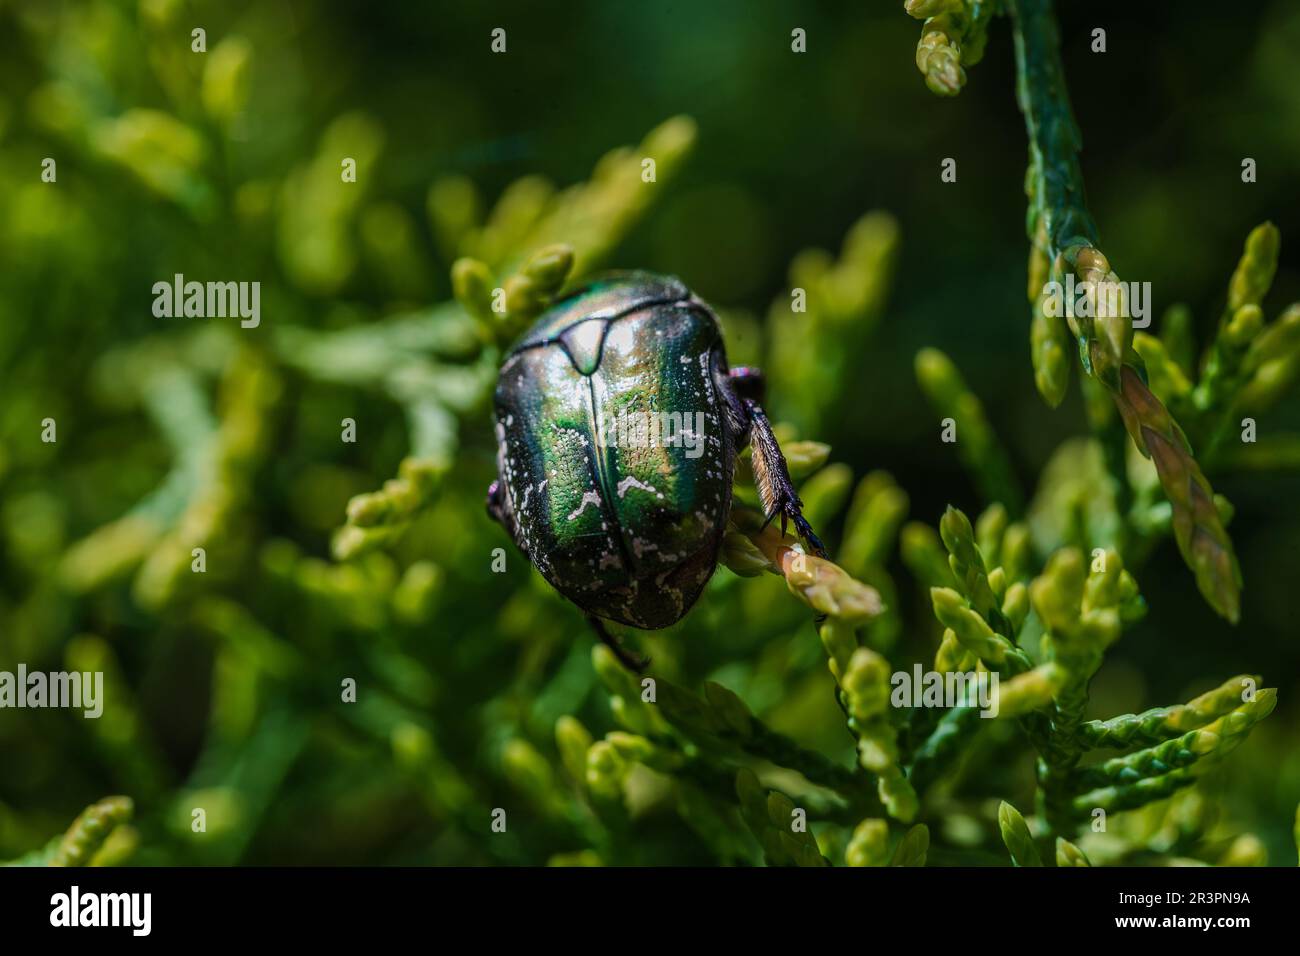 Macro shot of beautiful, metallic, shiny green and copper beetle (Protaetia cuprea) on green leaf surrounded with vegetation at spring. Protaetia cupr Stock Photo